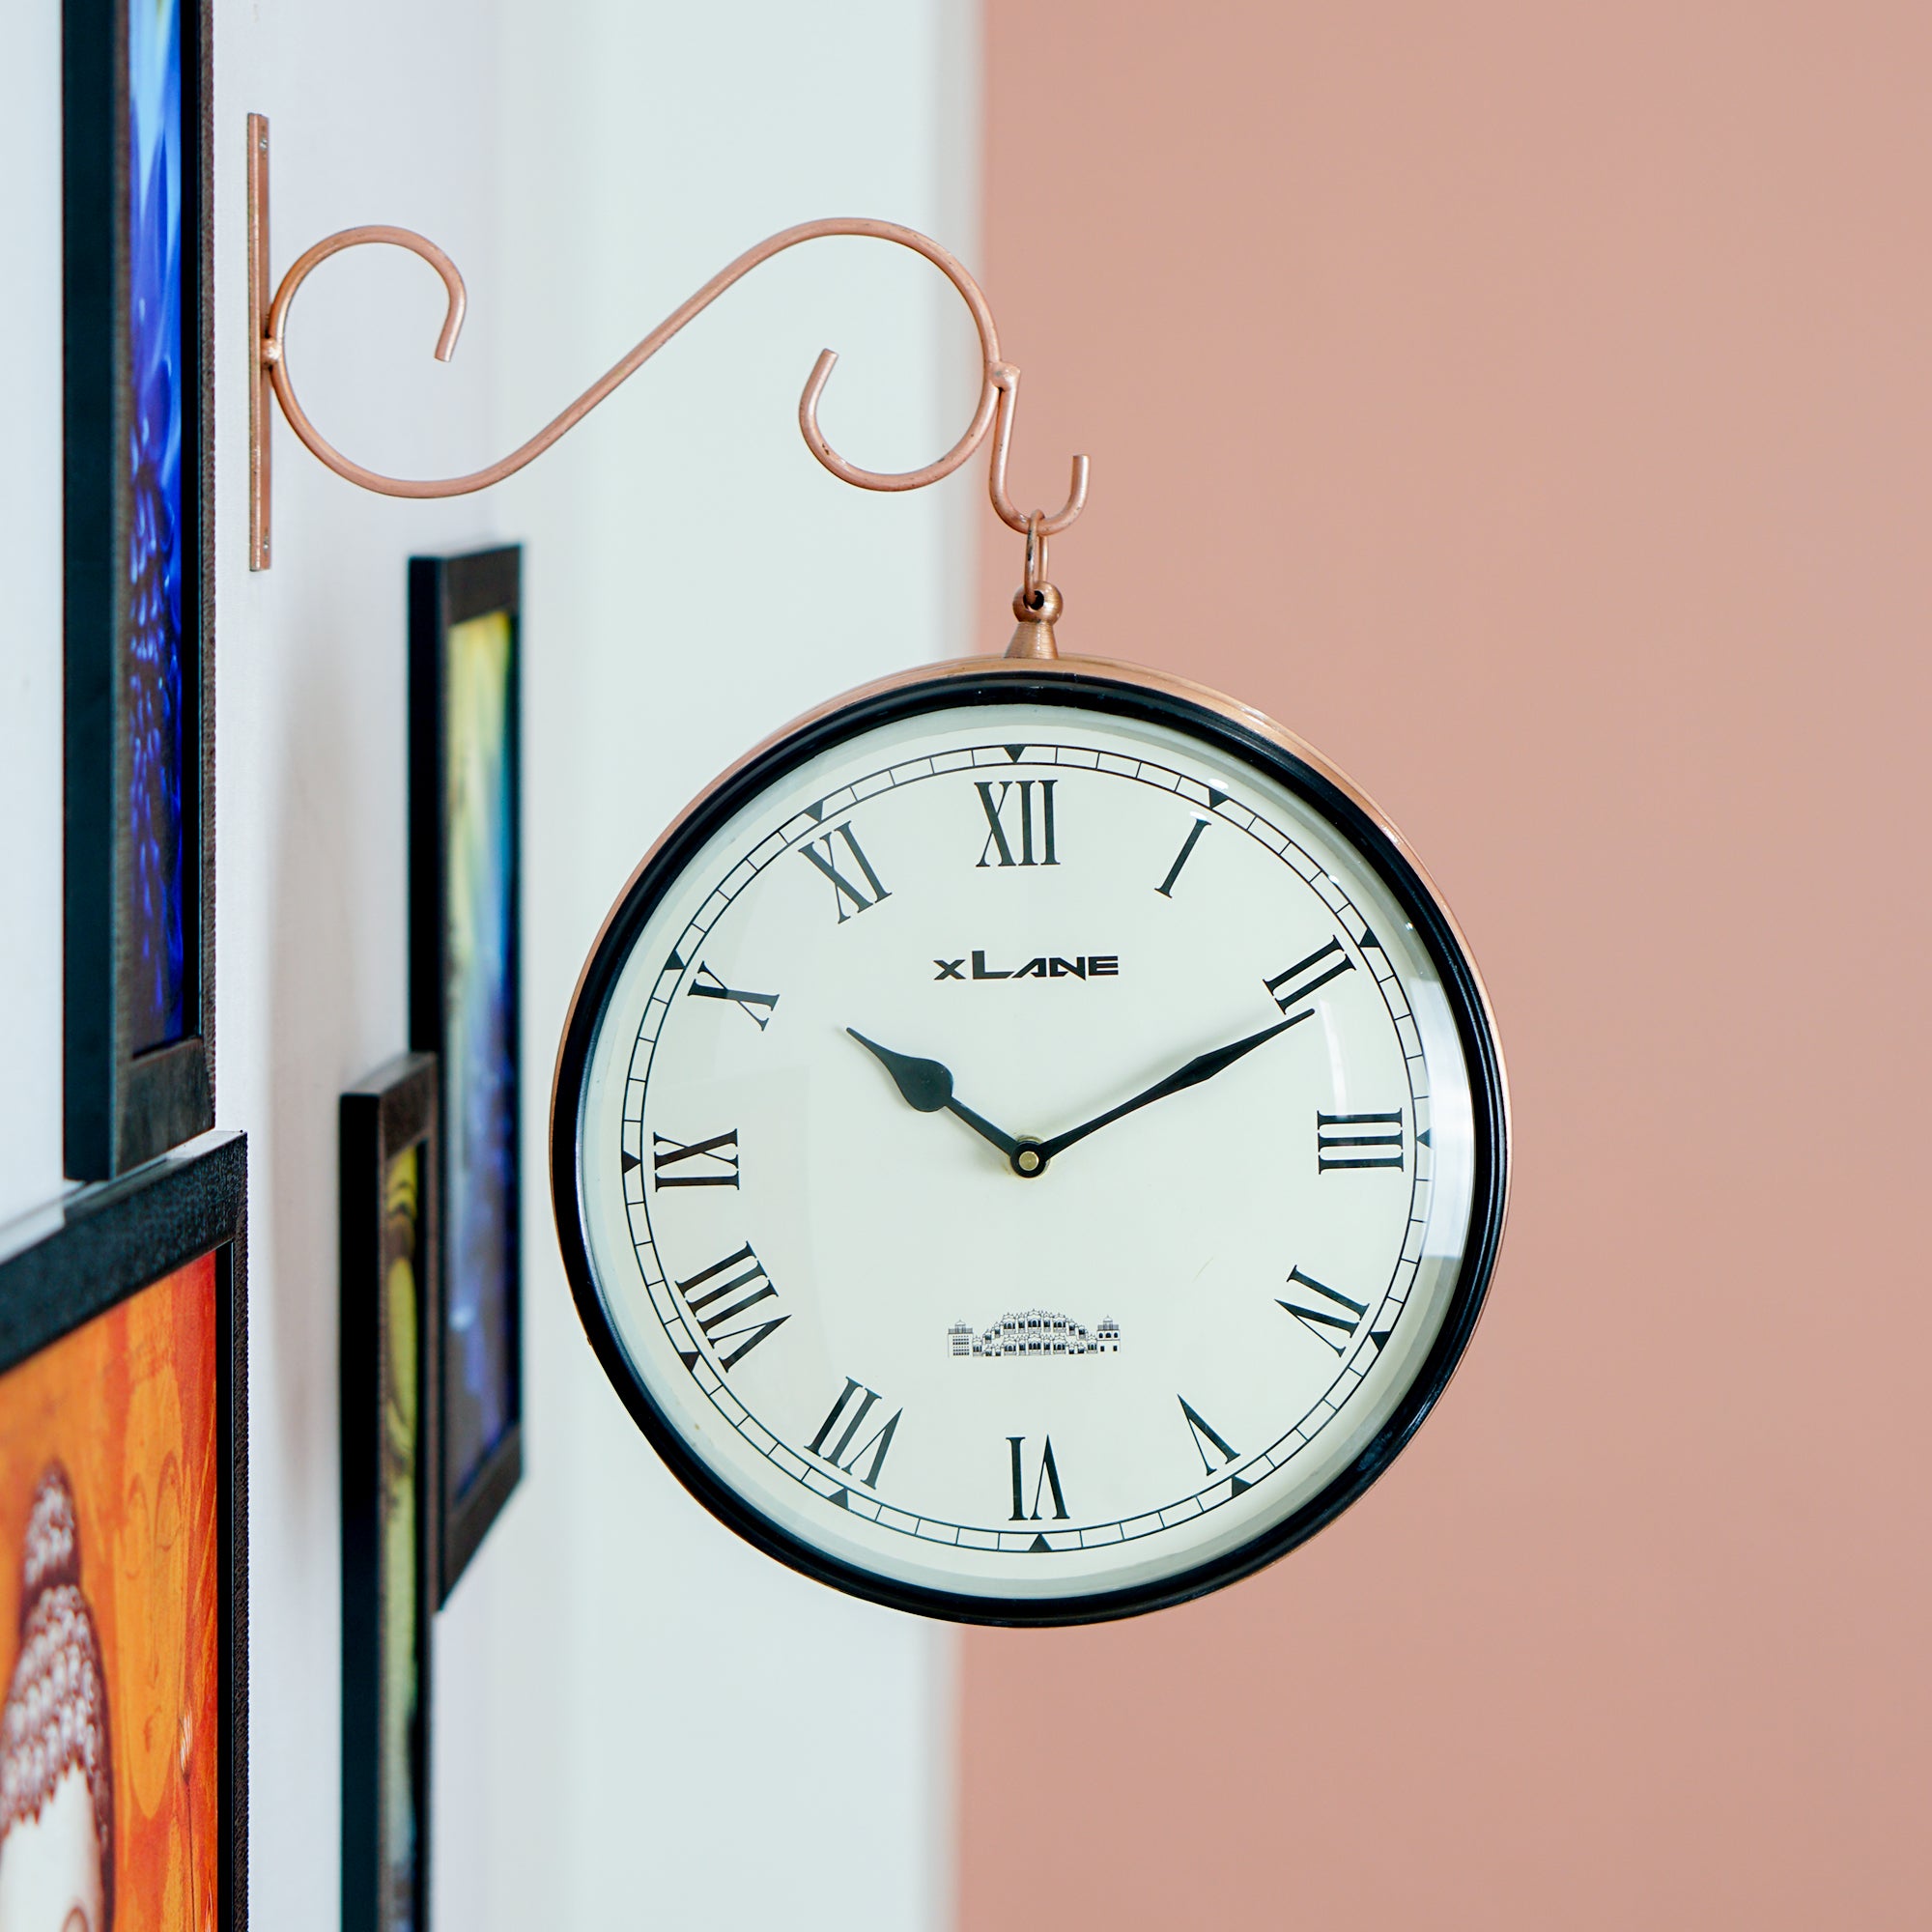 Kyoto 1.0 - Metal Wall Mounted Station Wall Clock for Home and Office